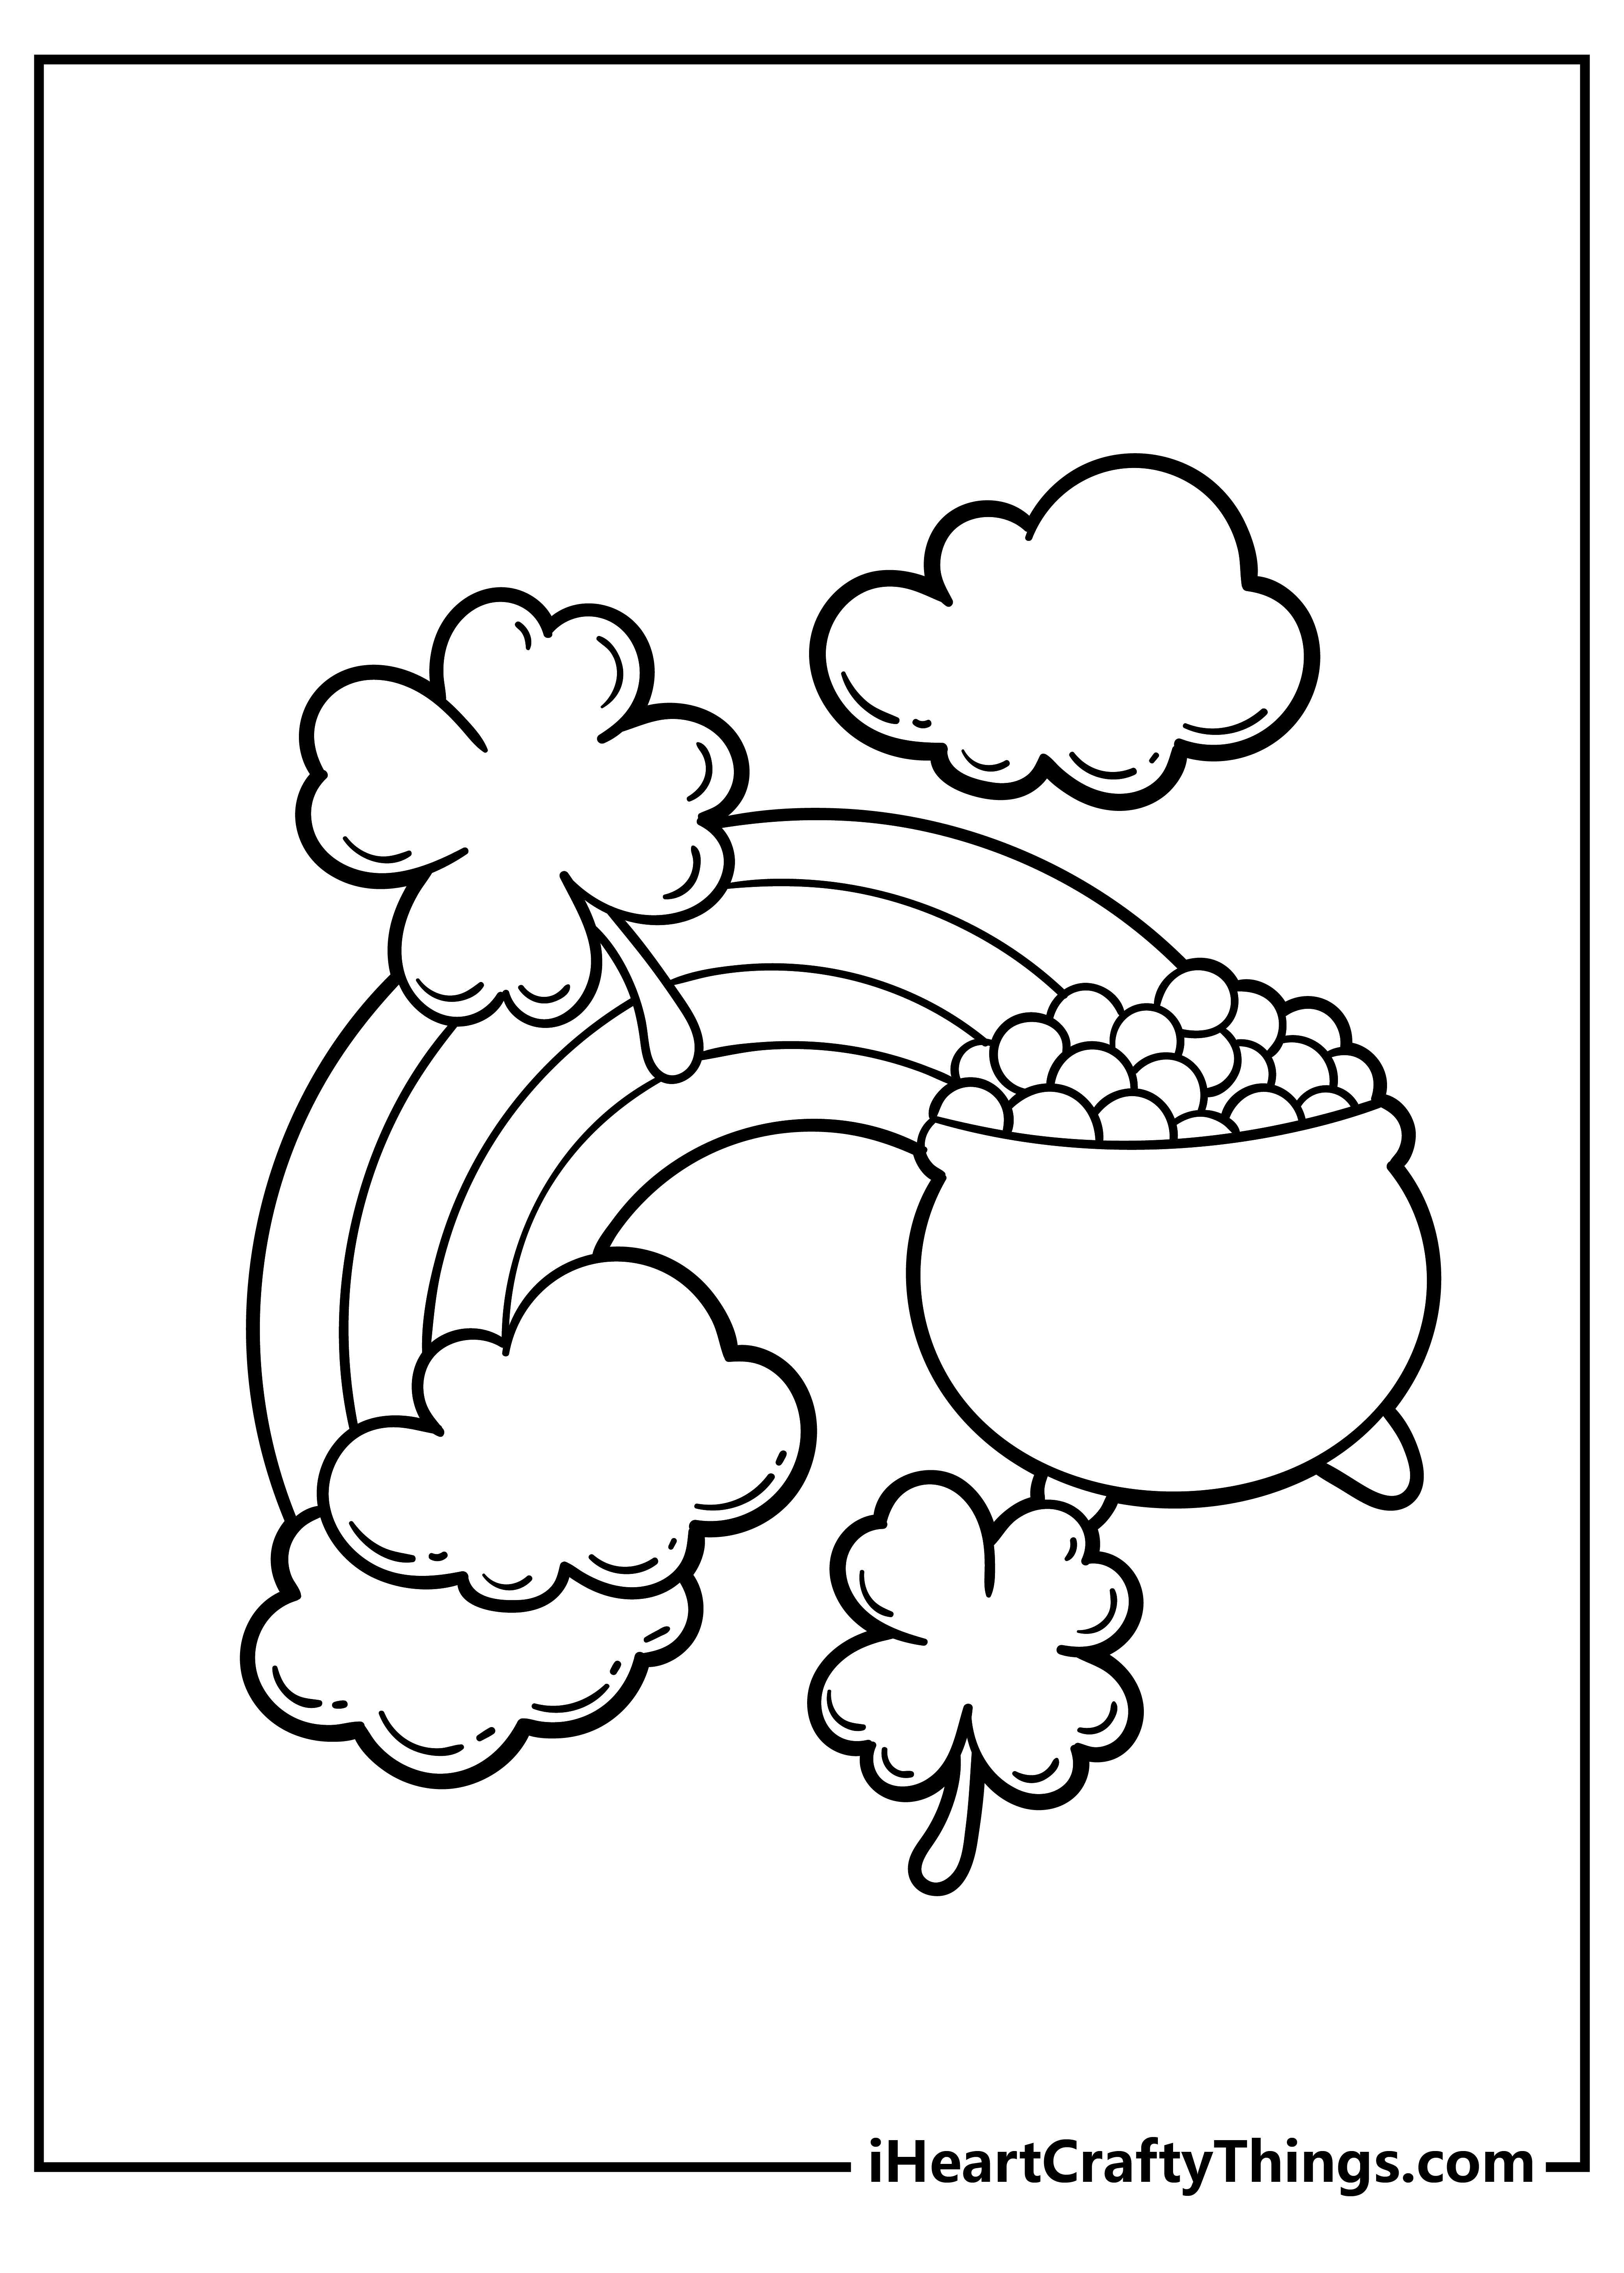 Printable St Patrick's Day Coloring Pages Updated 20